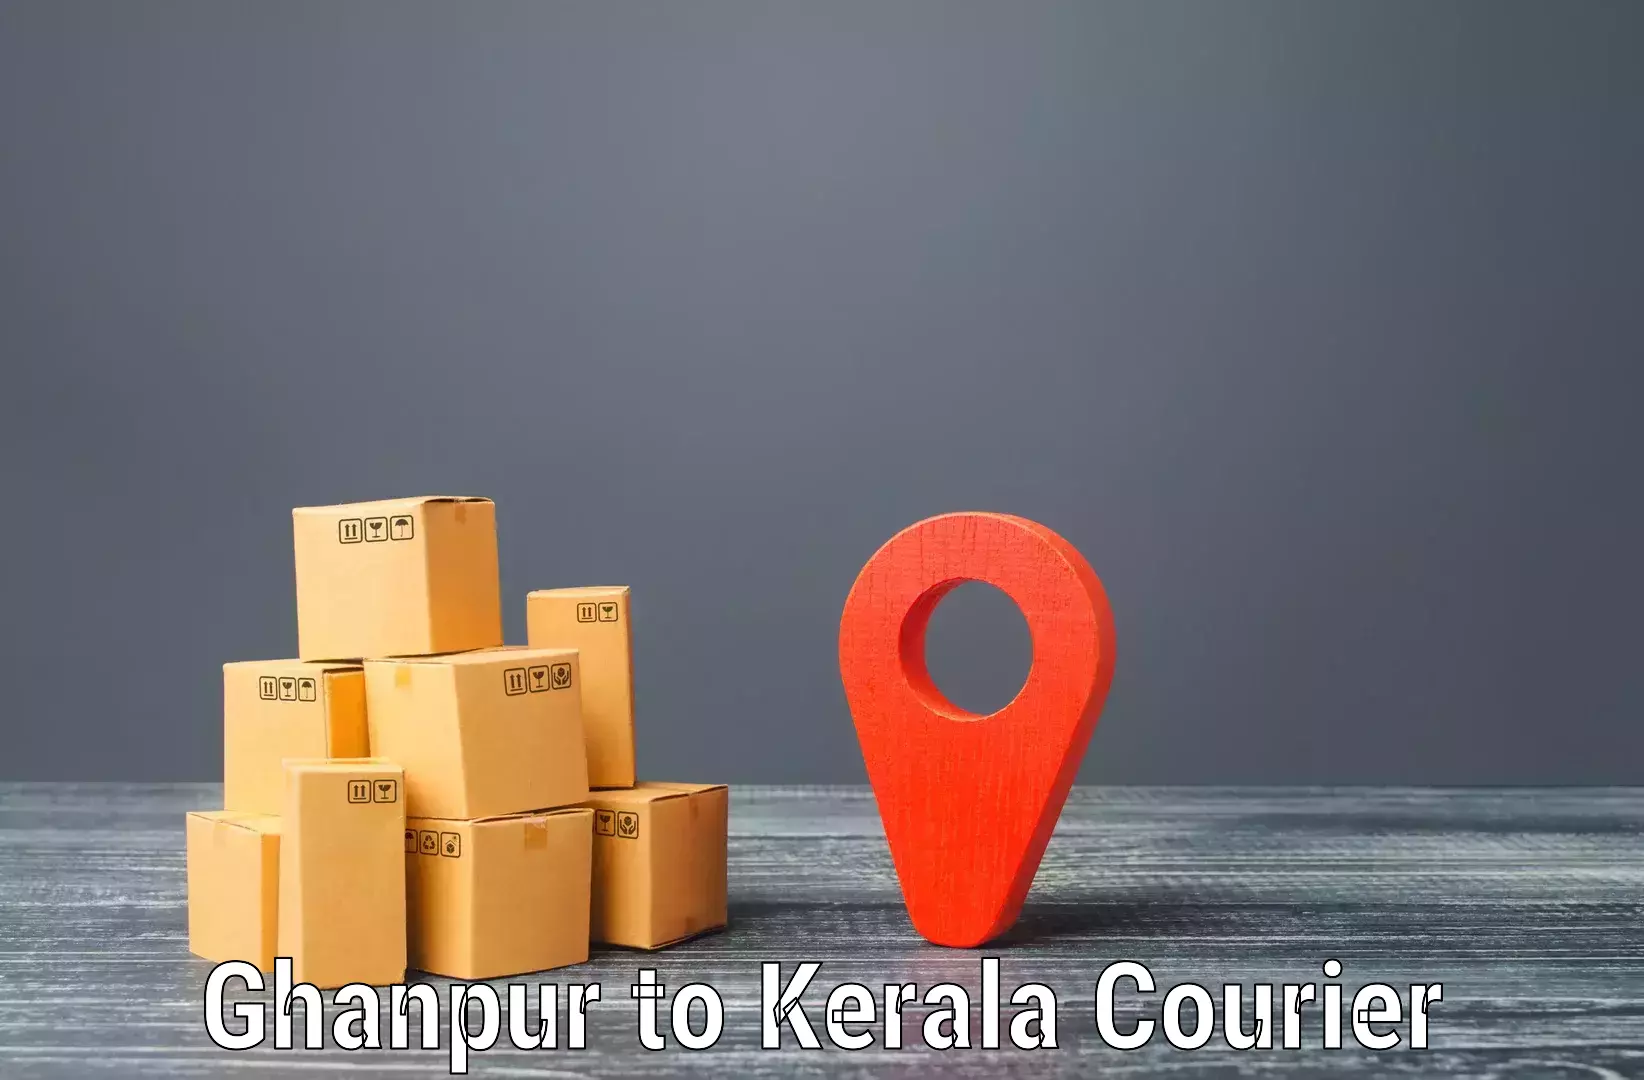 Flexible delivery schedules Ghanpur to Munnar